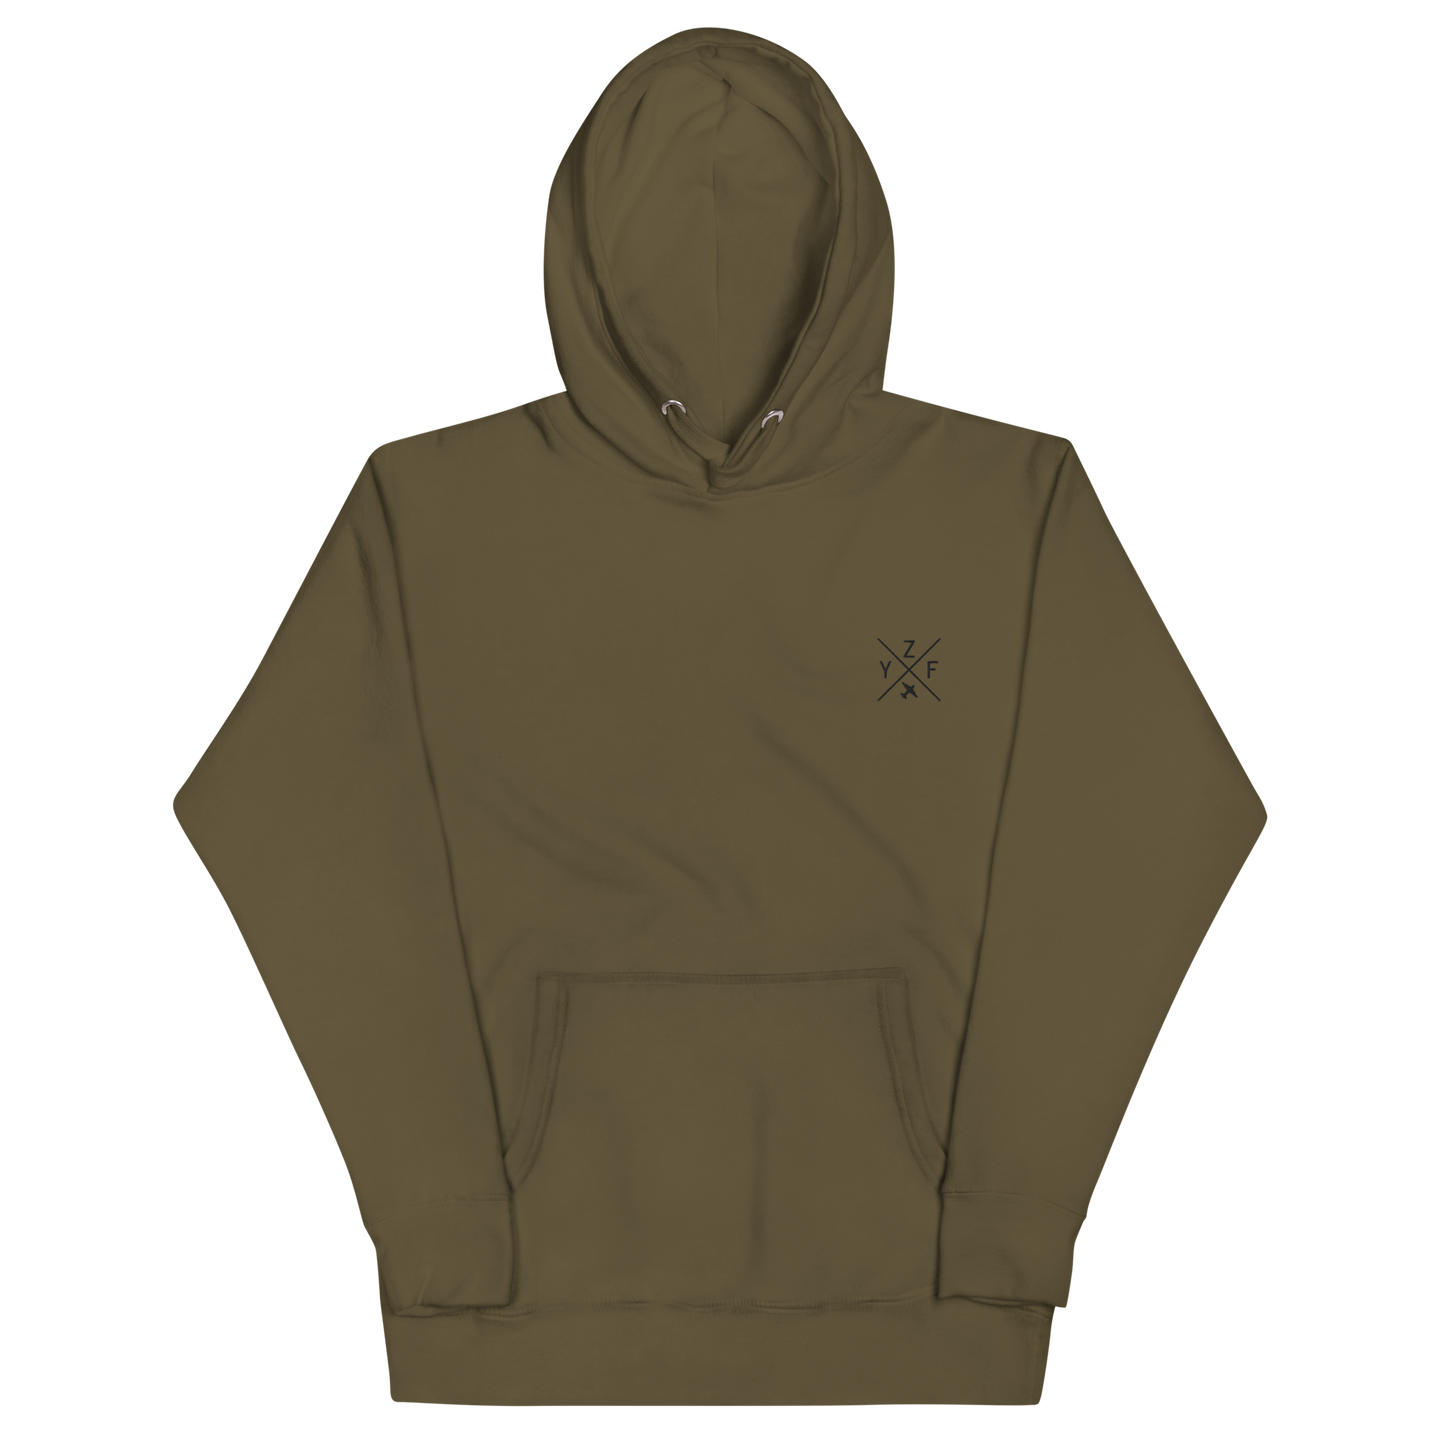 YHM Designs - YZF Yellowknife Premium Hoodie - Crossed-X Design with Airport Code and Vintage Propliner - Black Embroidery - Image 02